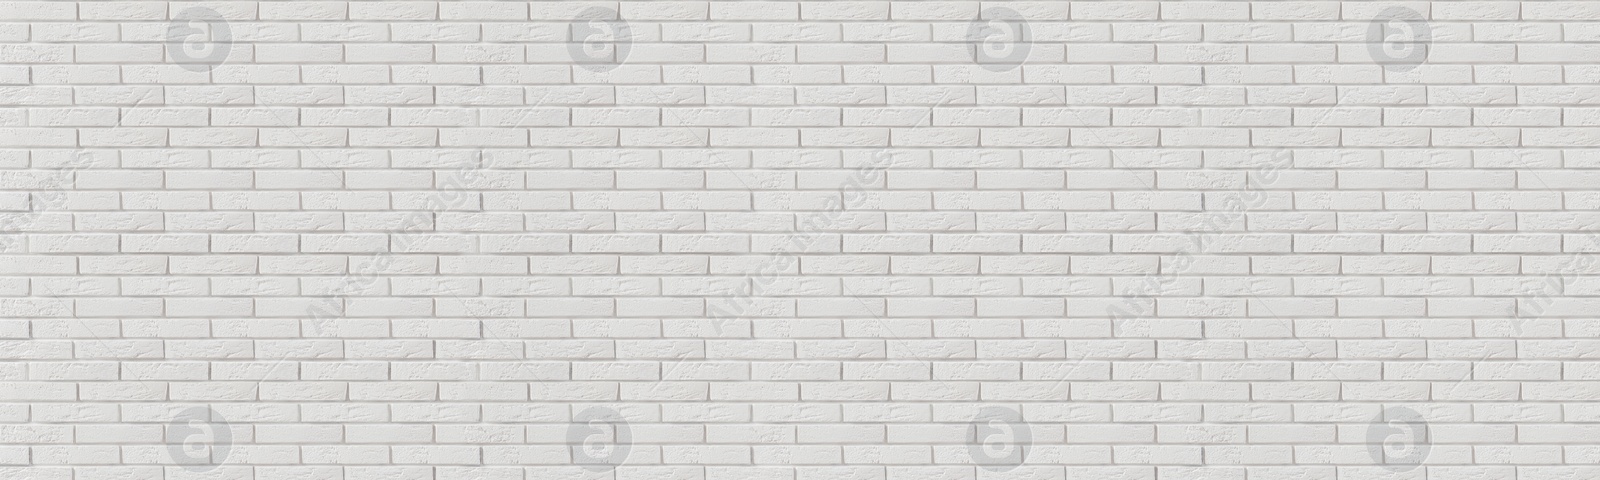 Image of White brick wall as background. Banner design